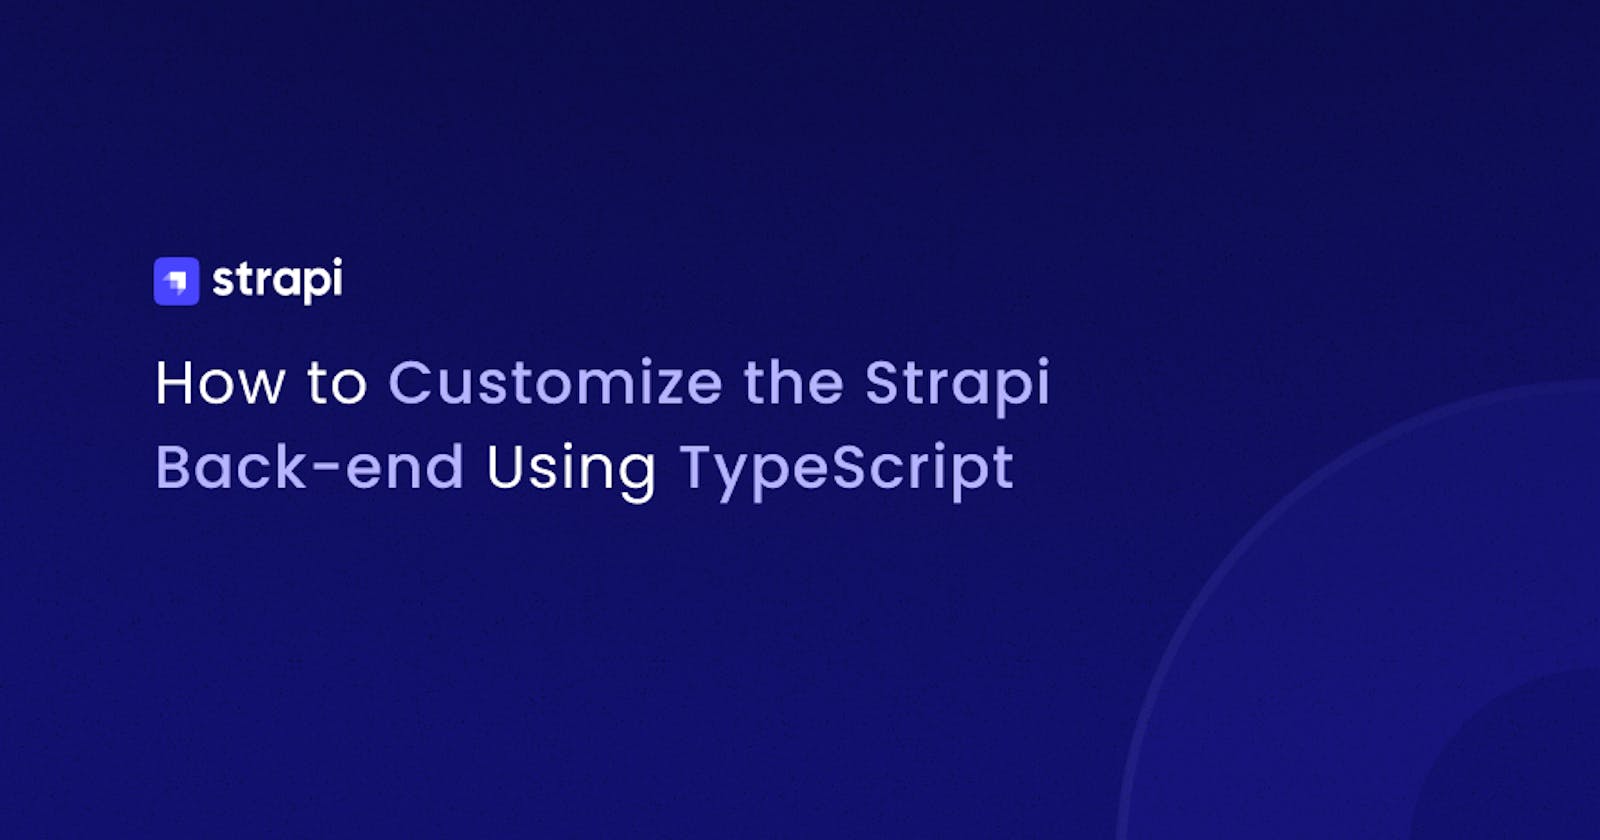 How to Customize the Strapi Back-end Using TypeScript